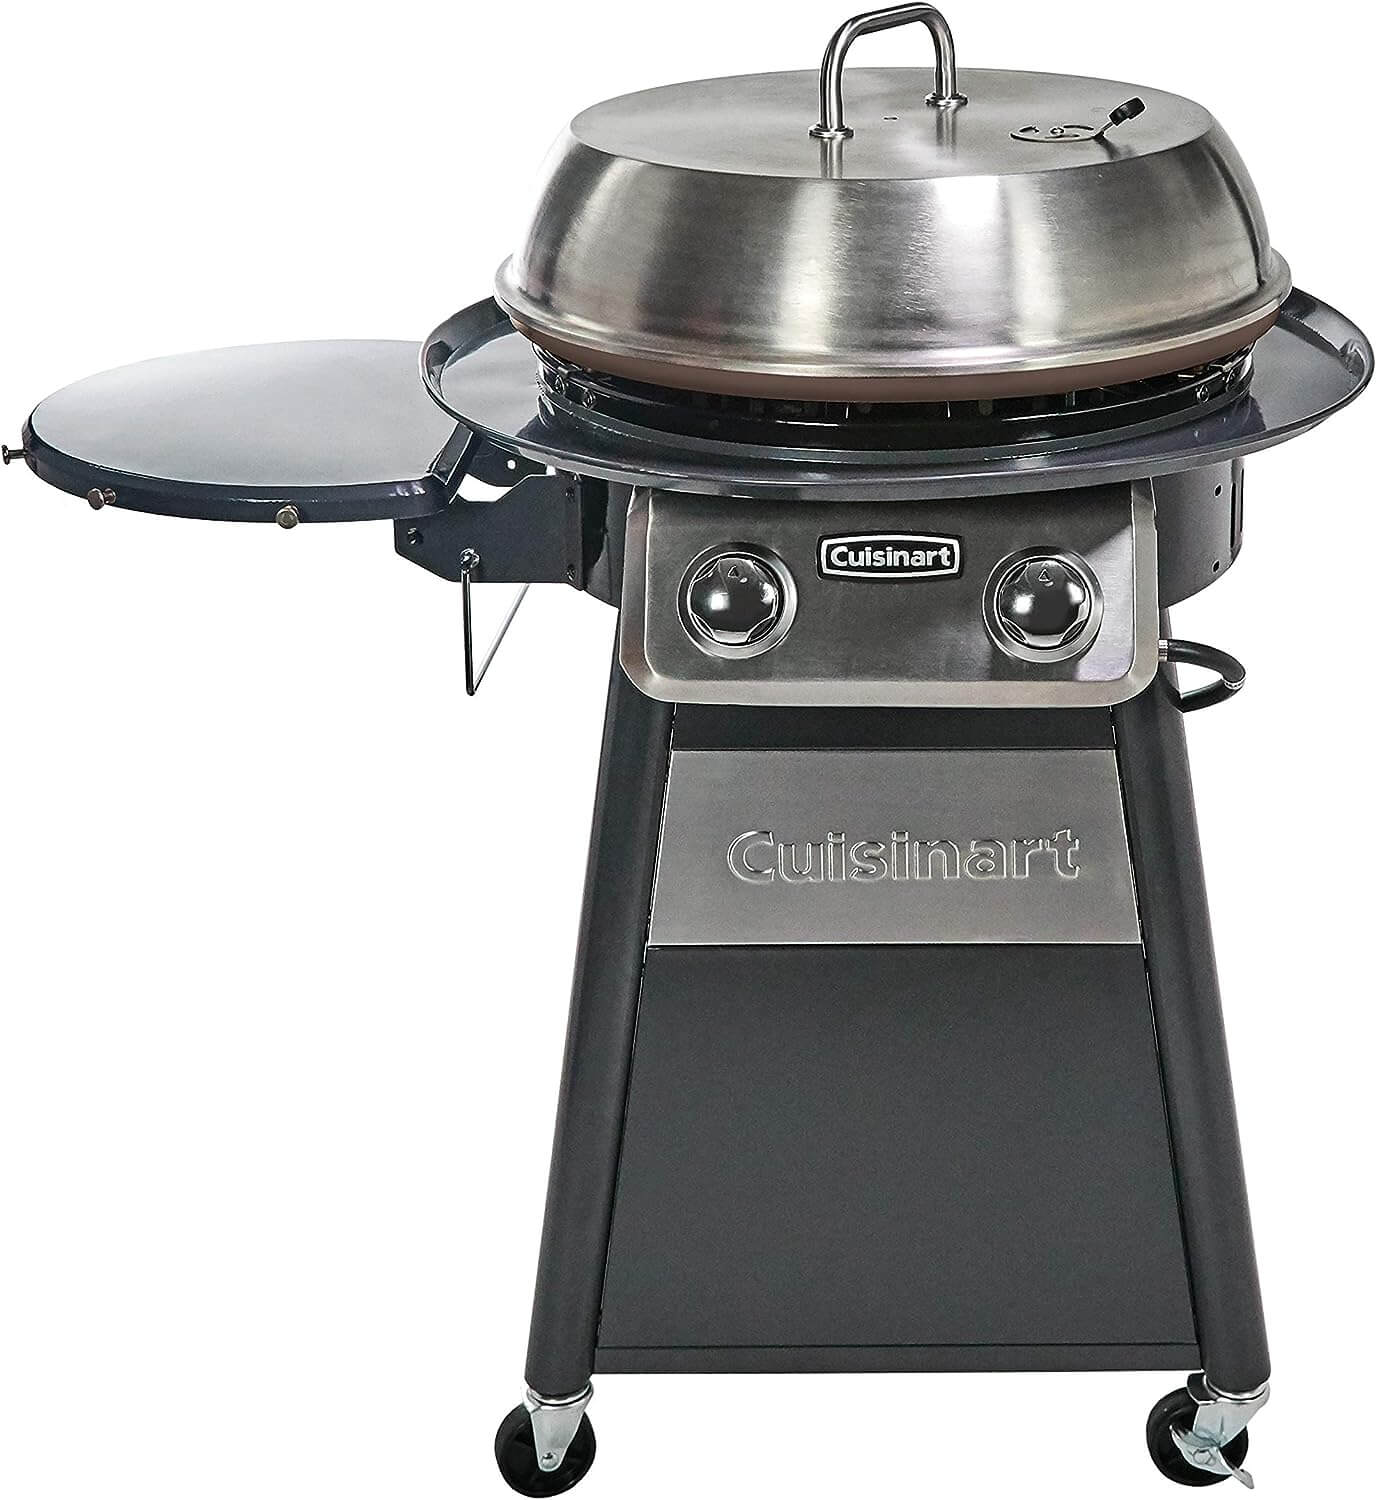 Cuisinart CGG-888 Stainless Steel Grill